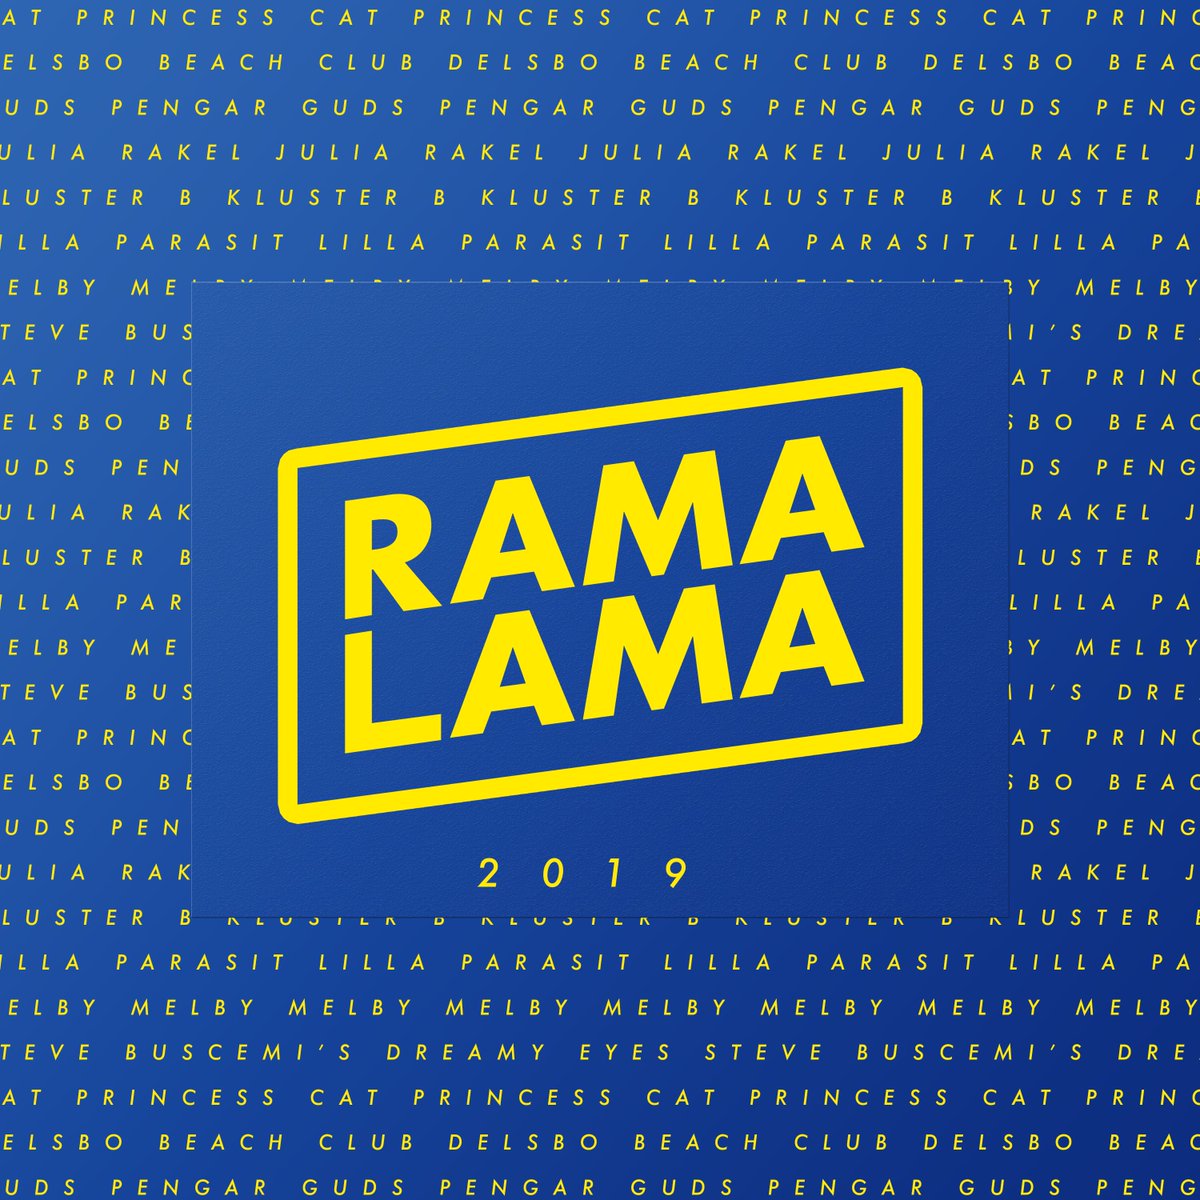 Out now on all platforms - 'Rama Lama Records 2019'! A compilation of some of our favorite releases from the Rama Lama family this year. Stream: ffm.to/ramalama2019